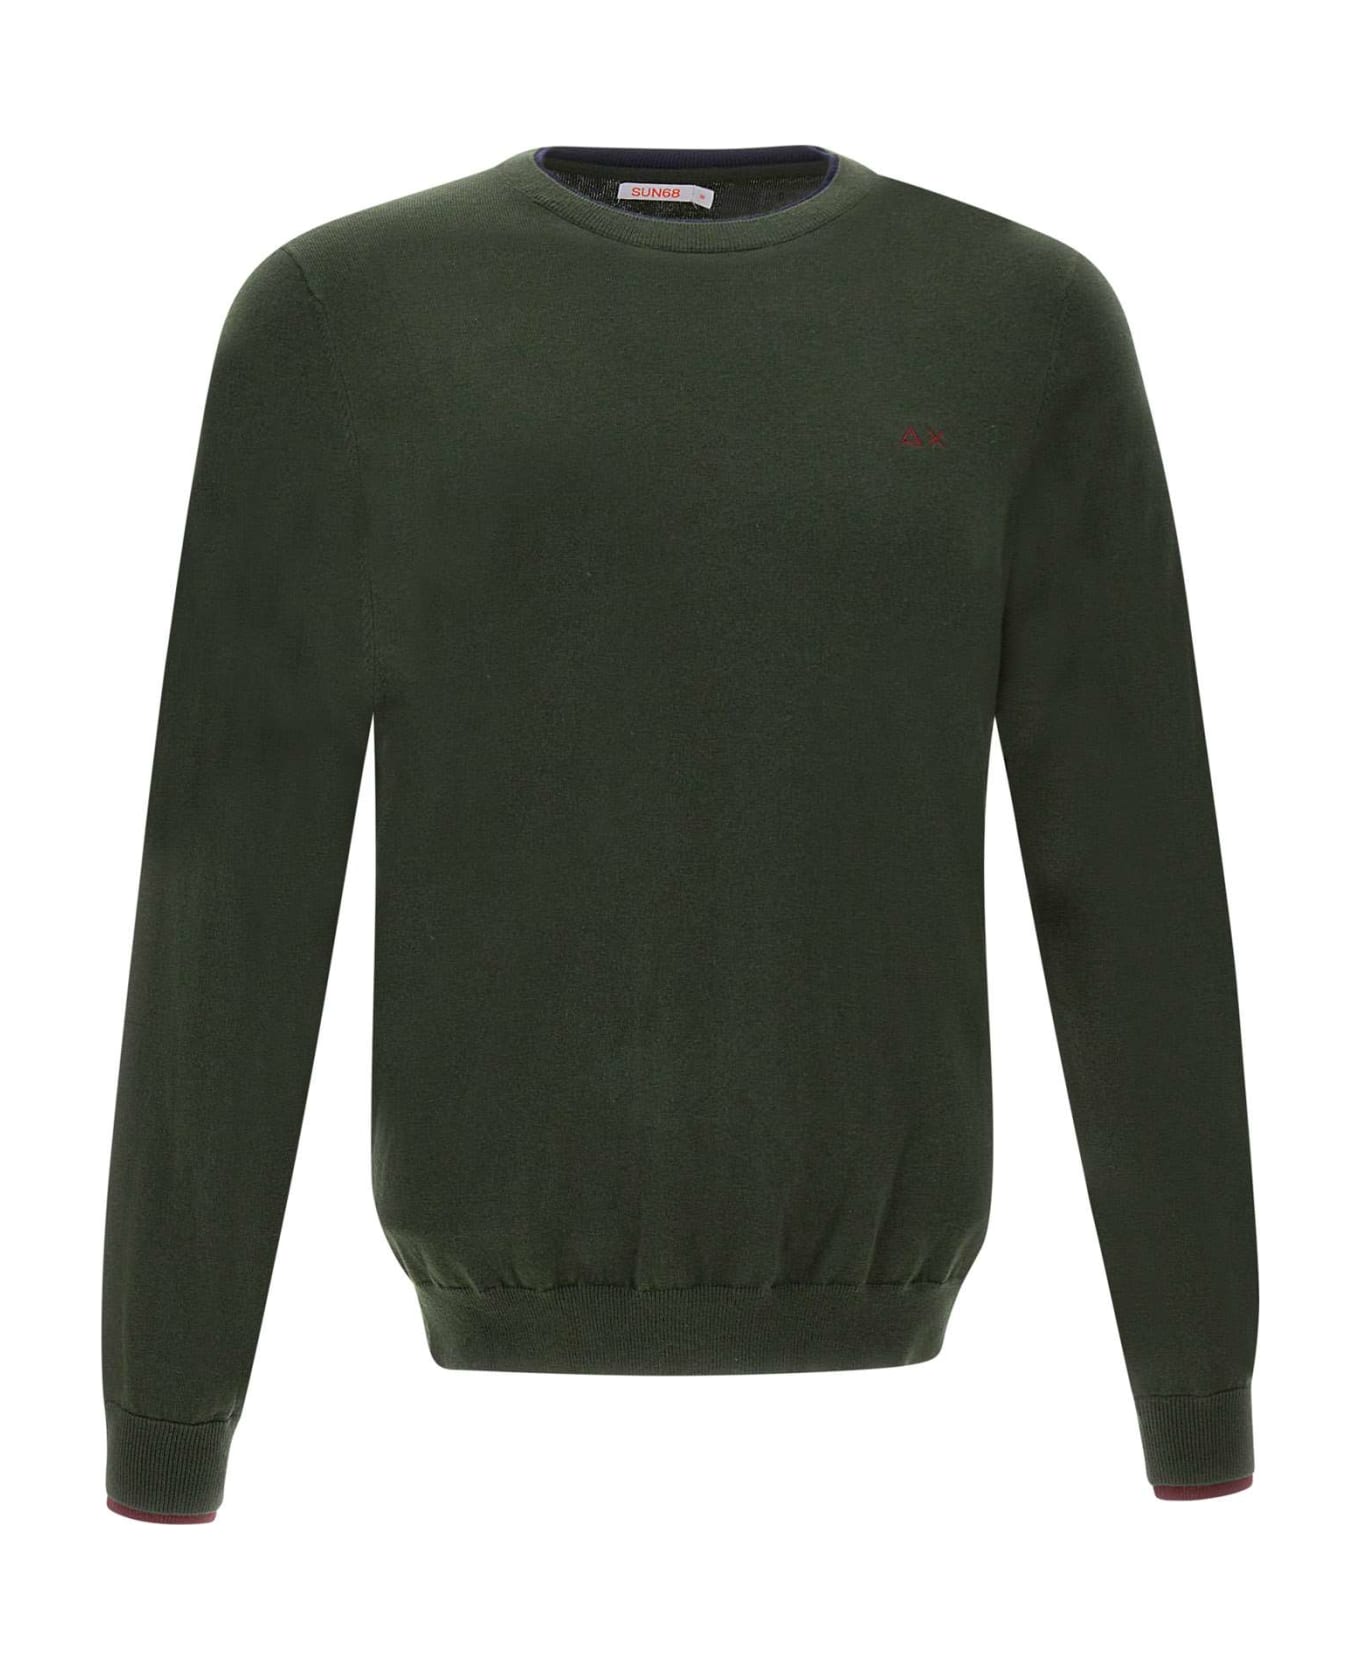 Sun 68 'round Double' Cotton And Wool Pullover Sweater - MILITARE